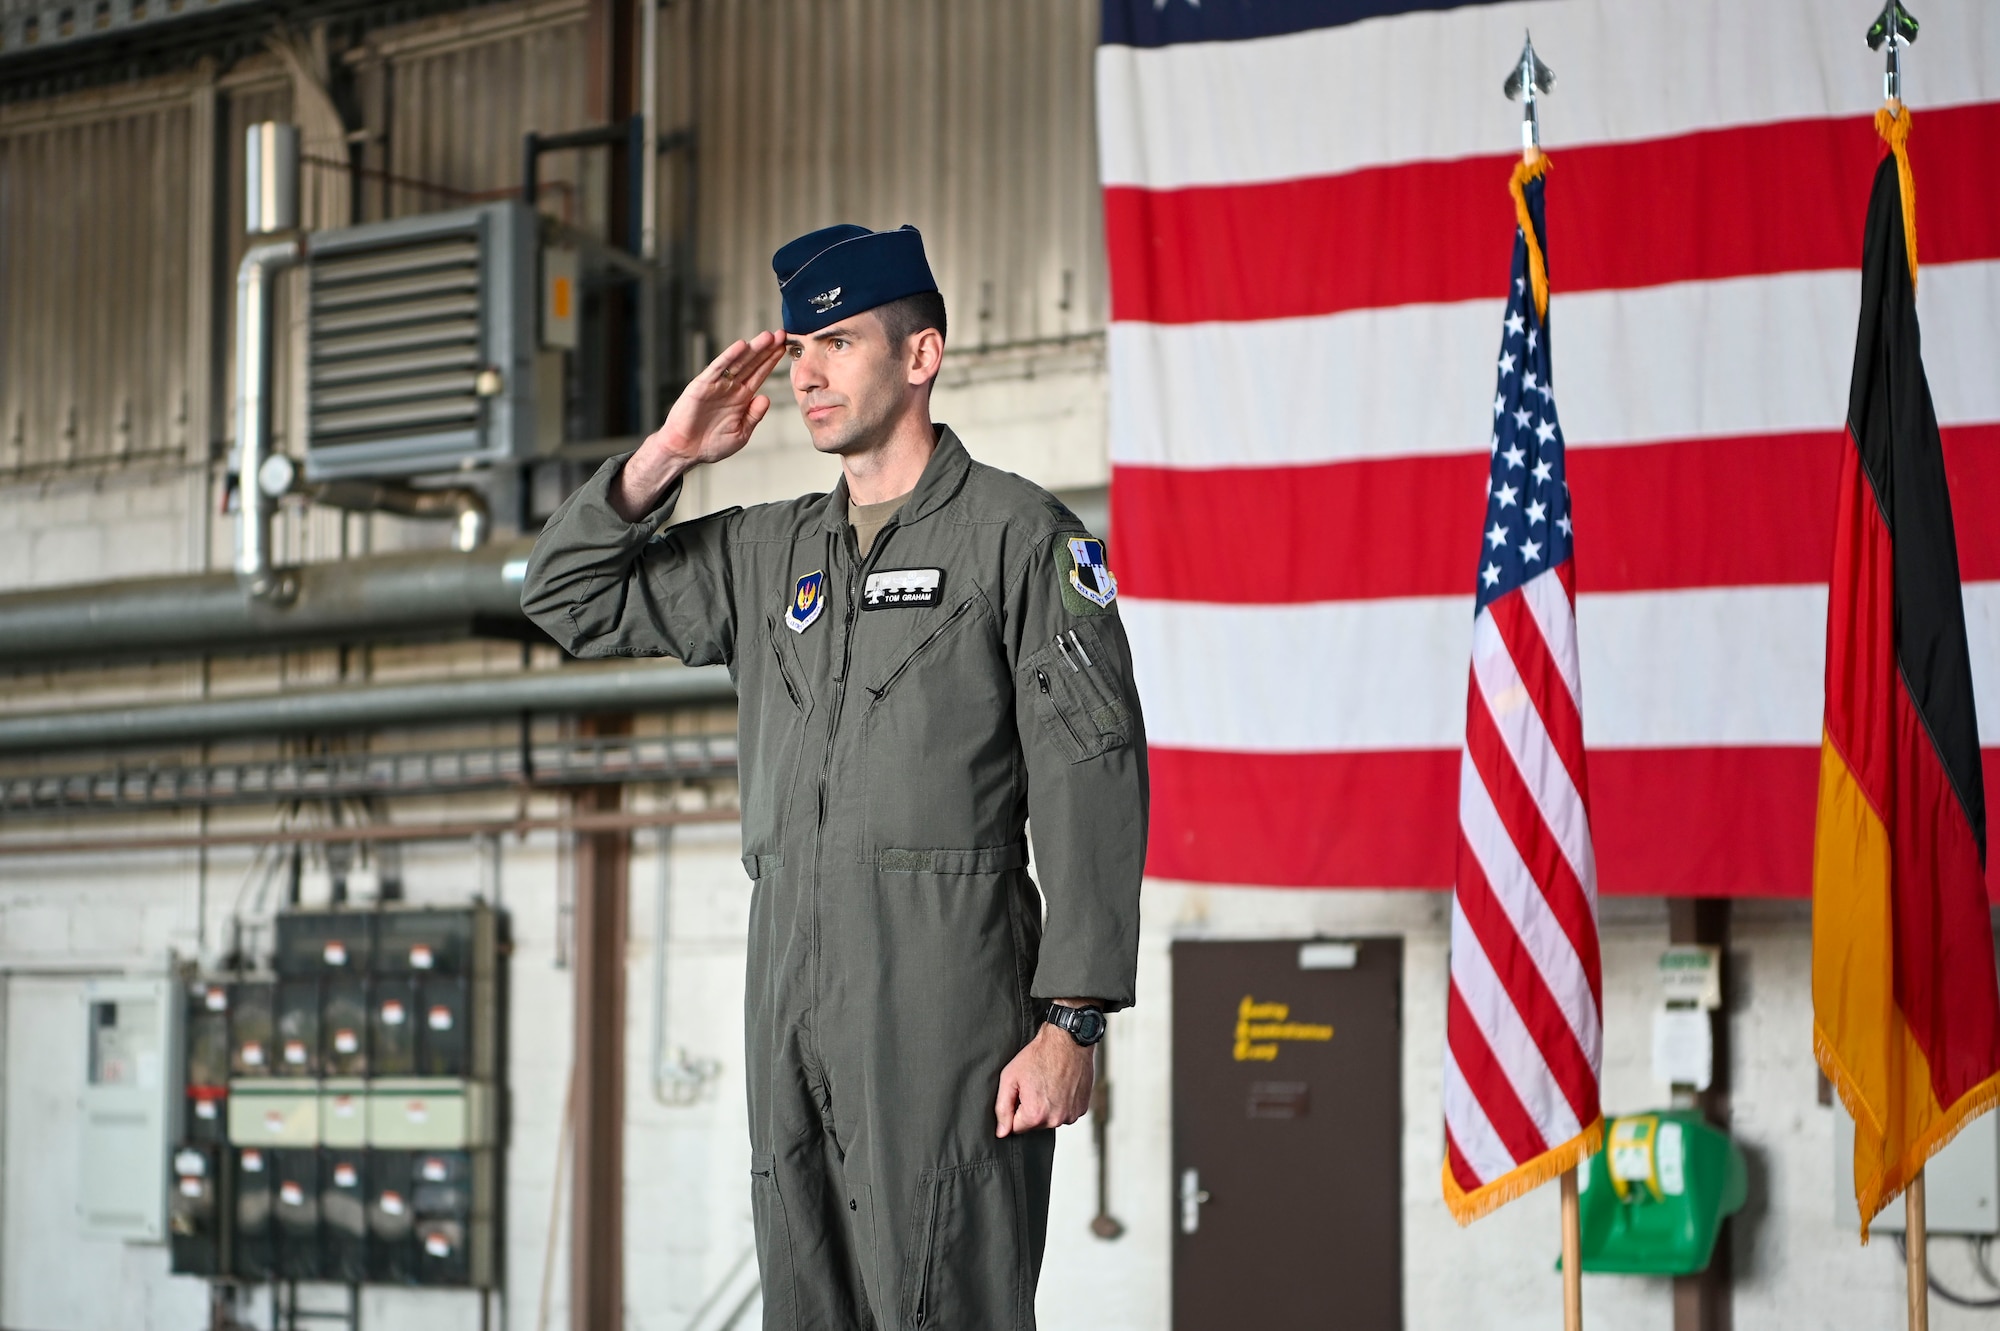 Col. Thomas Graham, 52nd Operations Group commander, renders the first salute during the 52nd OG assumption of command ceremony, June 28, 2022, on Spangdahlem Air Base, Germany. The first salute is a customary sign of respect and responsibility between members of the unit and the commander. (U.S. Air Force photo by Senior Airman Jessica Sanchez-Chen)